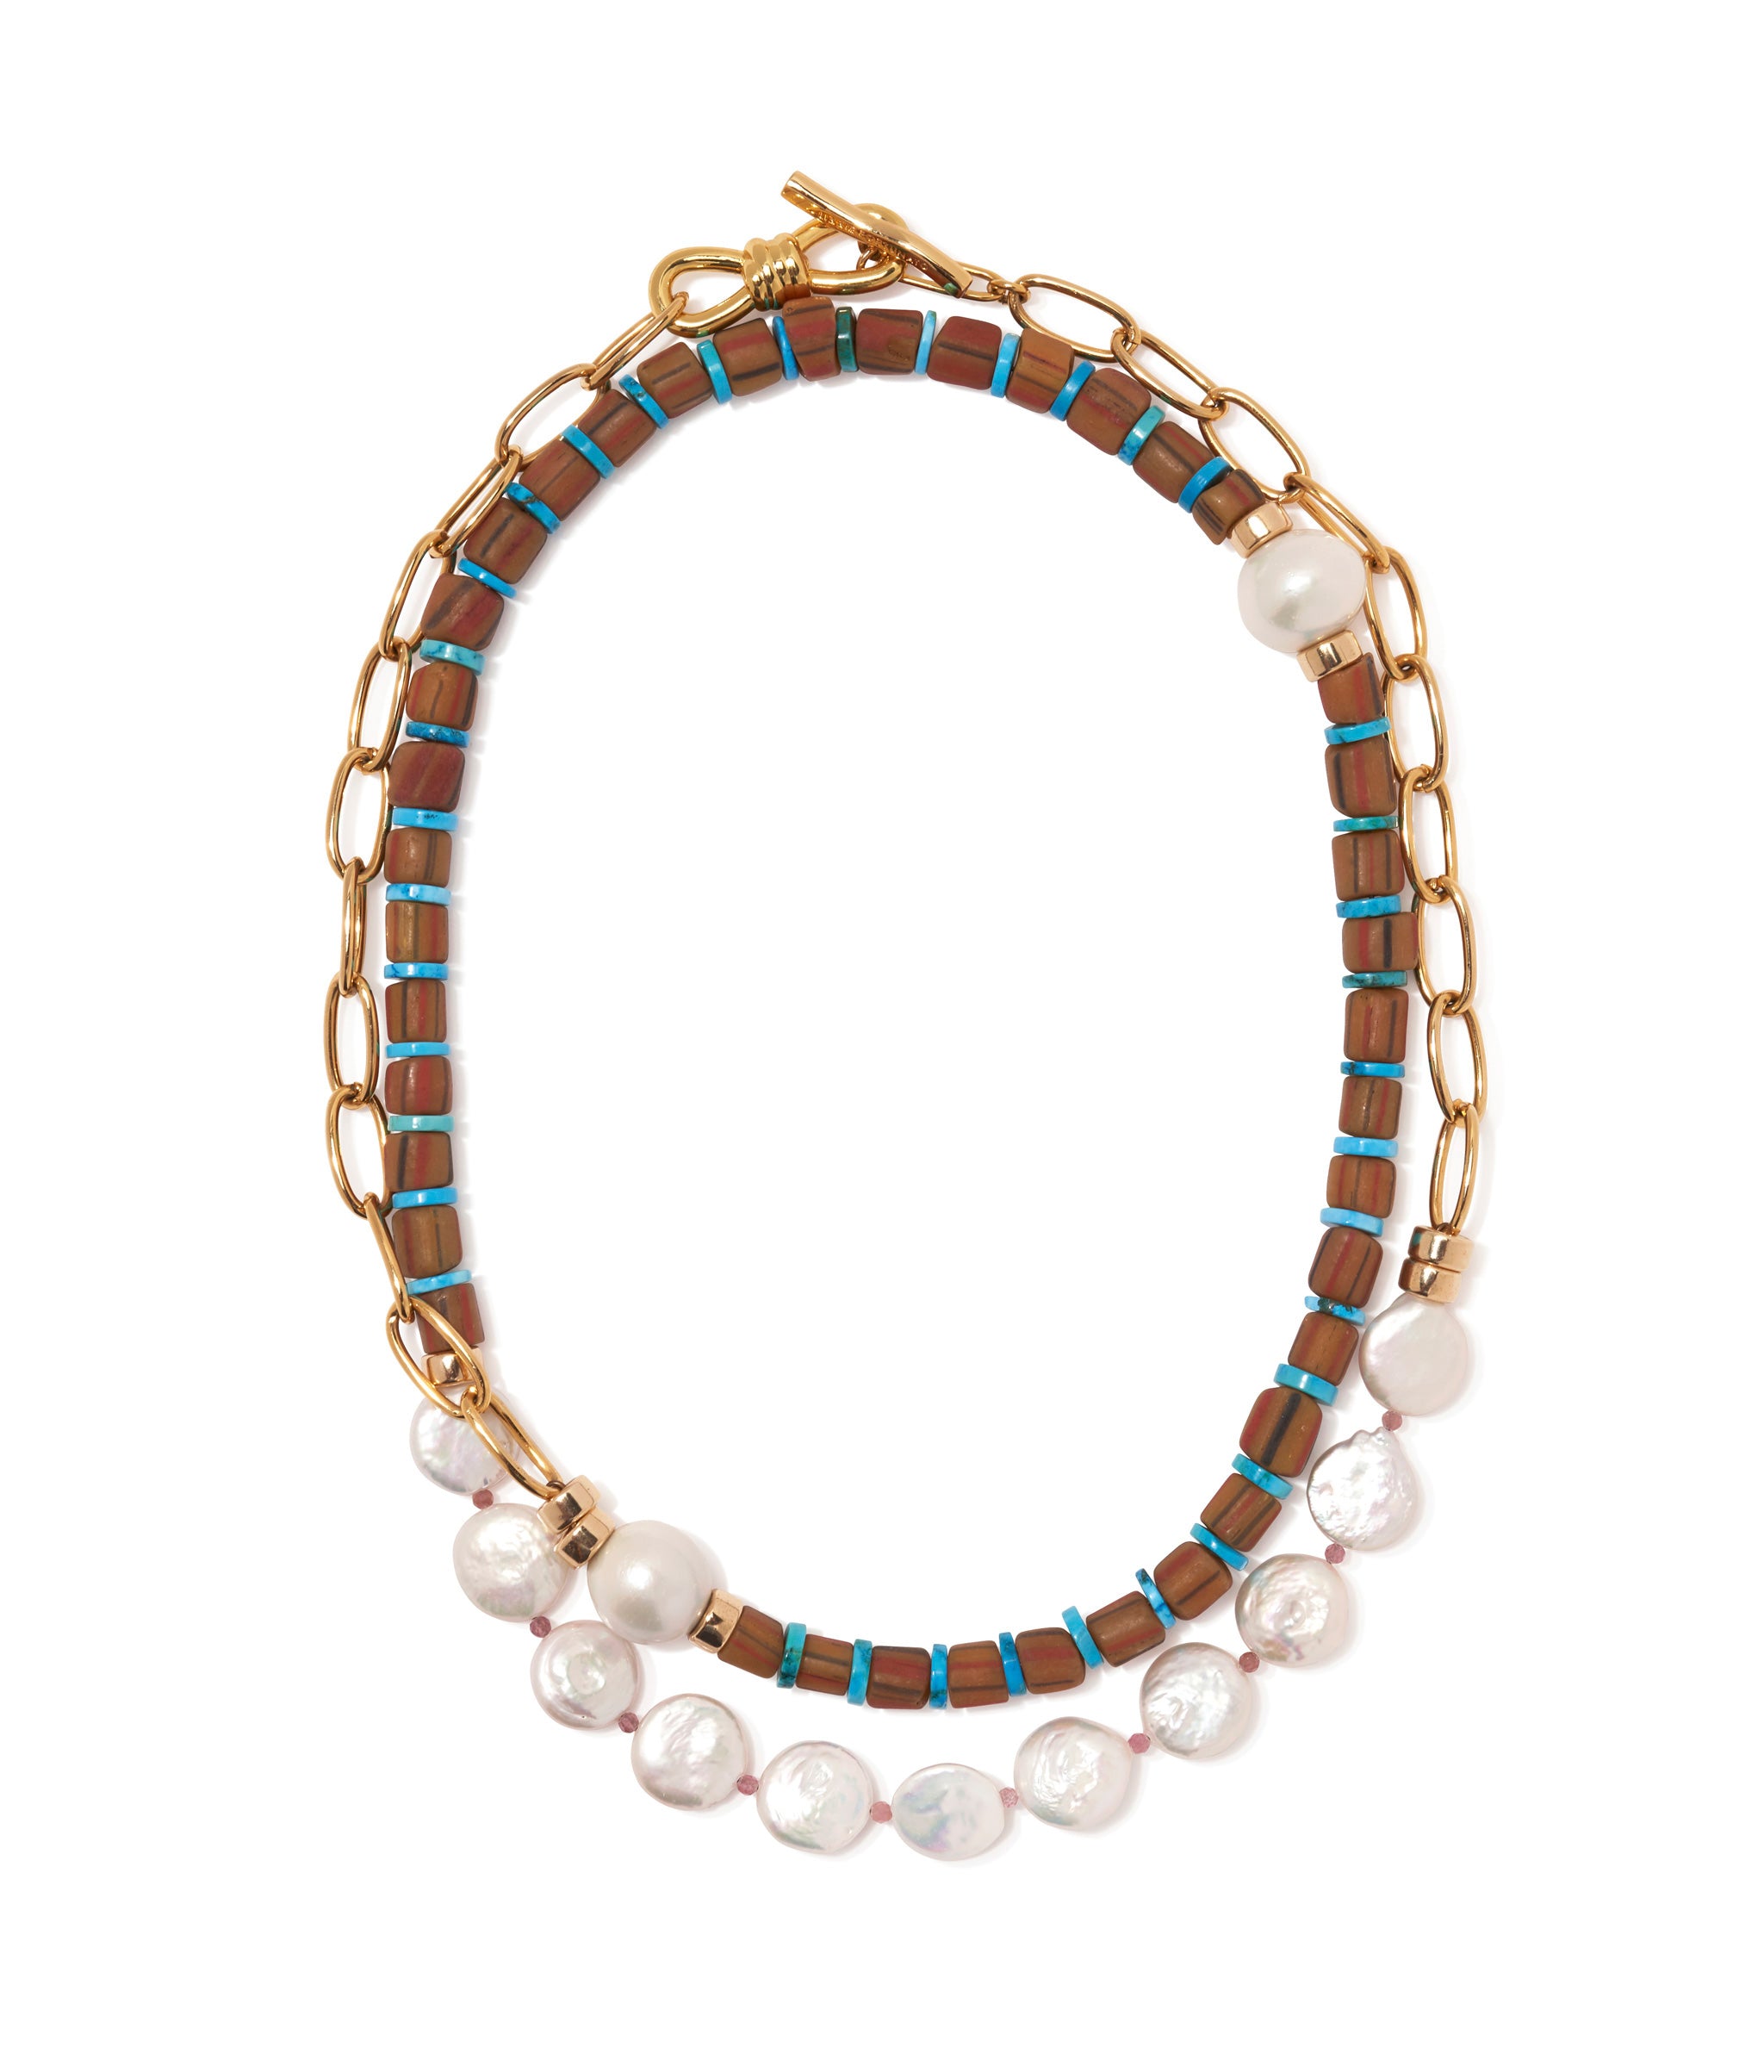 Porto Covo Necklace in Azul. Necklace with freshwater pearls, brown java glass beads, dyed blue howlite. Wrapped twice.